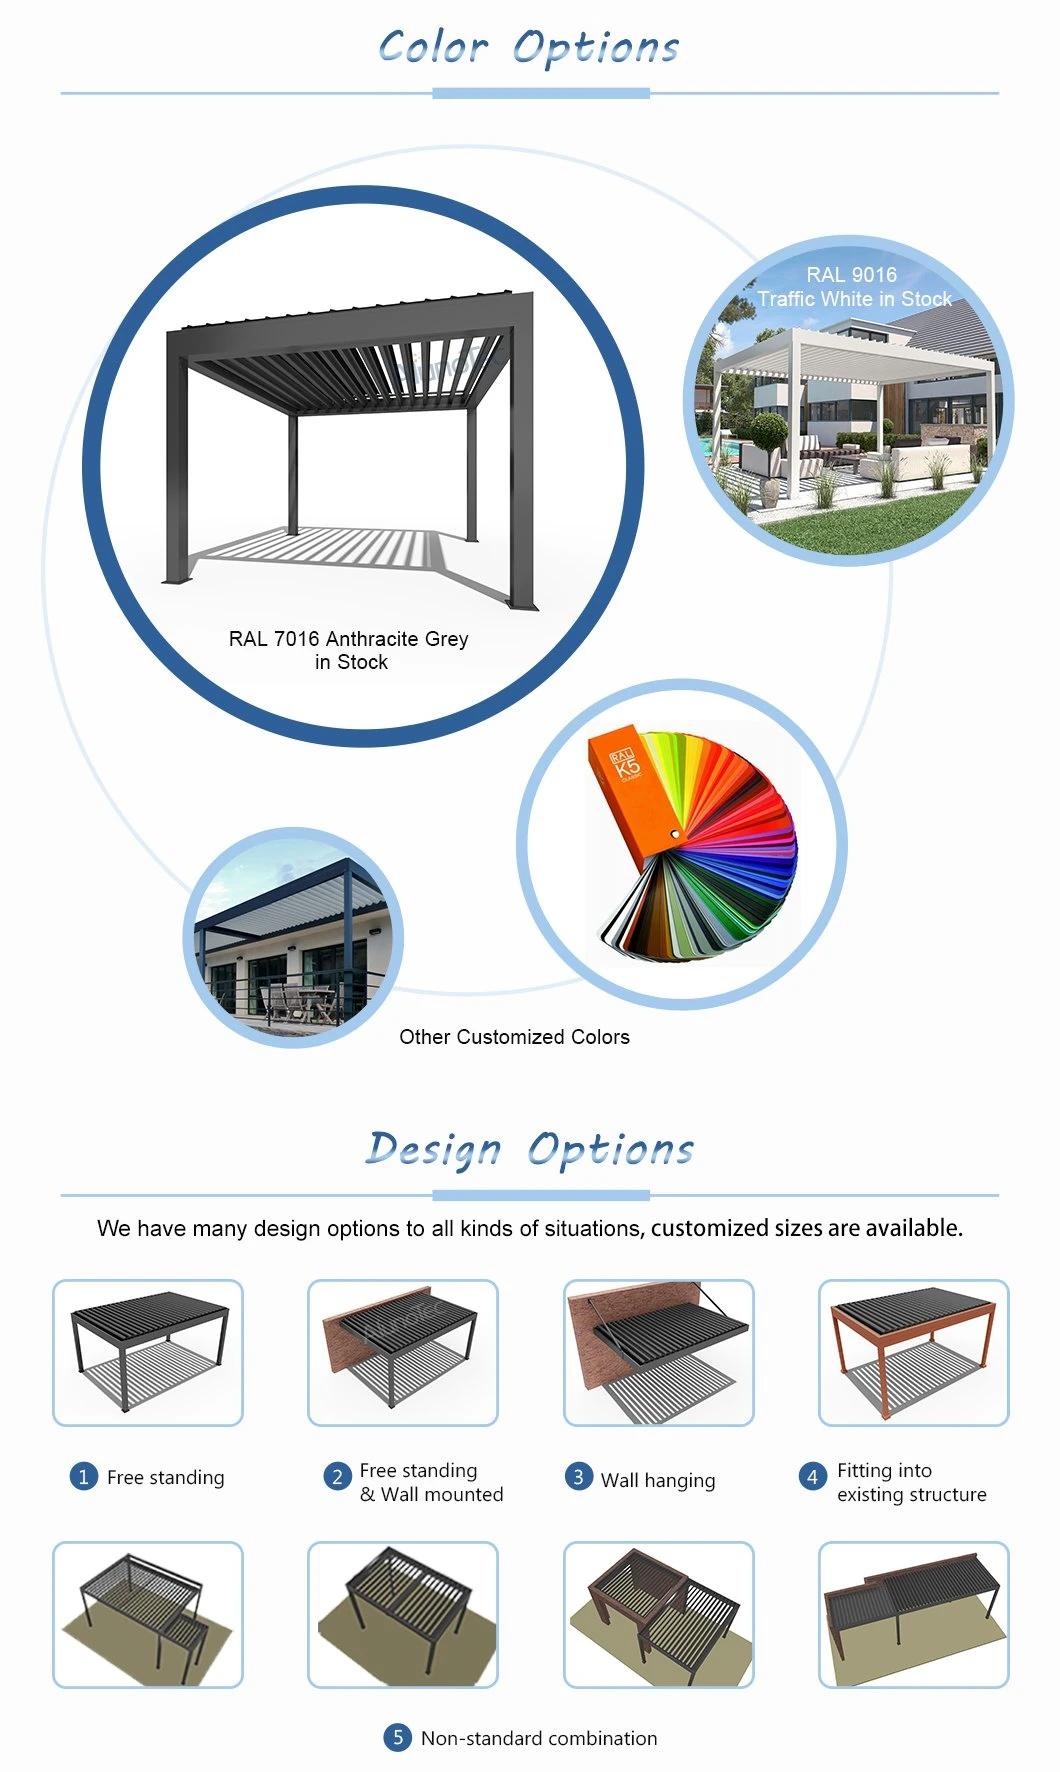 Customize Easily Assembled Gazebo Pergola with Screens and Lights